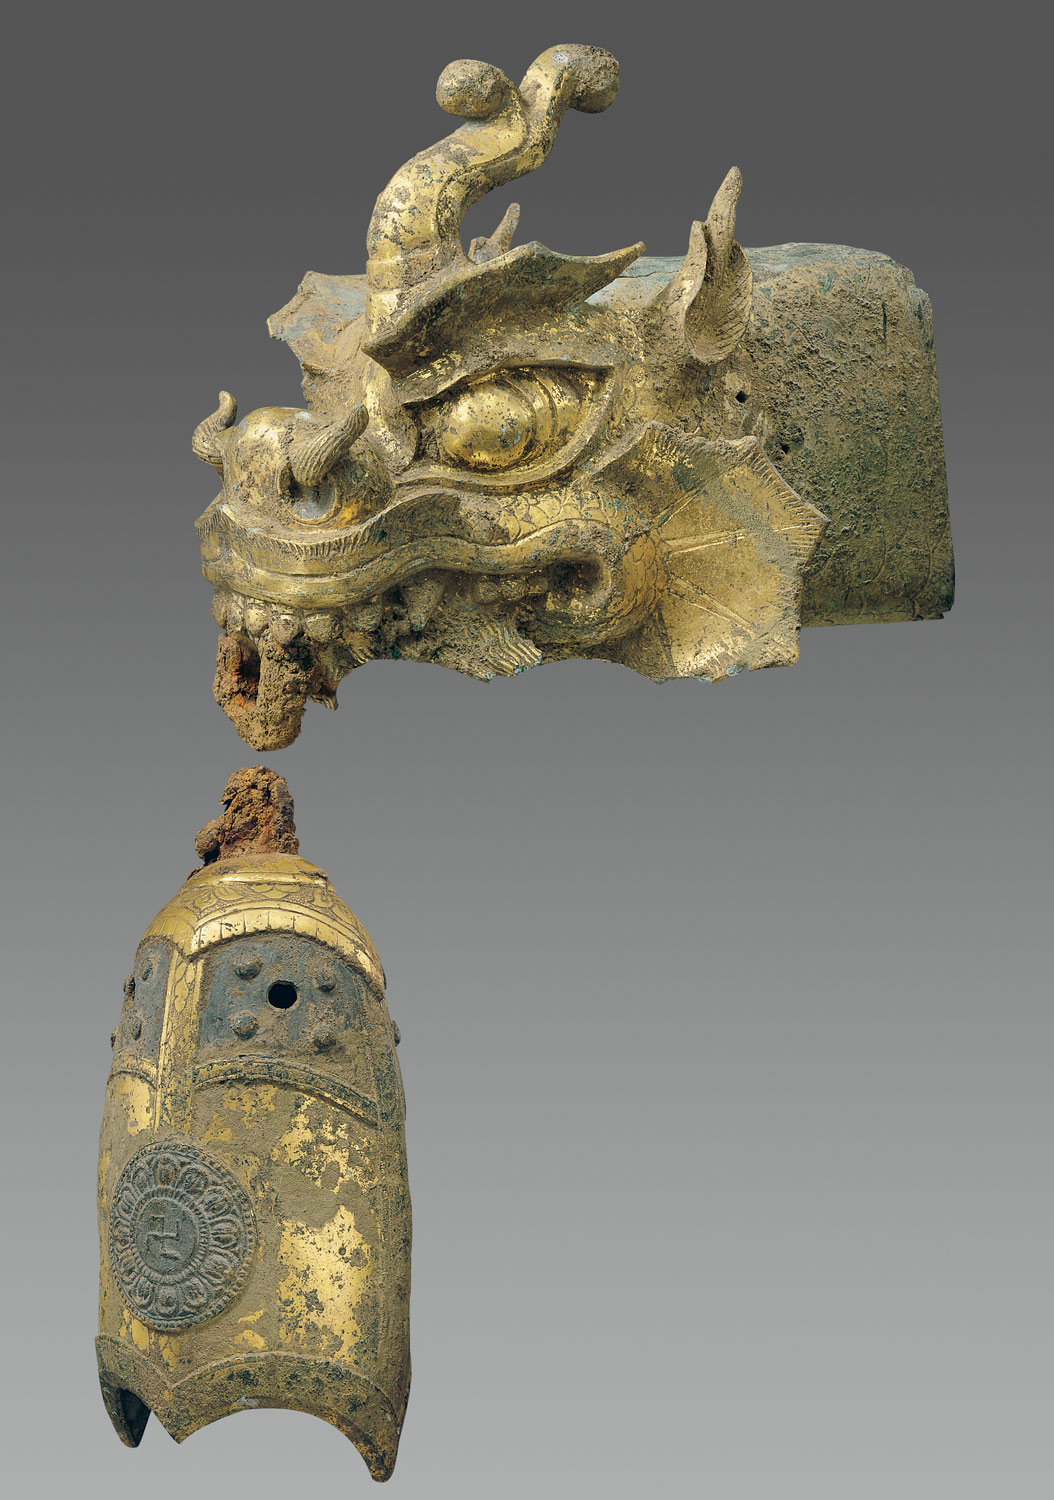 Rafter finial in the shape of a dragons head and wind chime